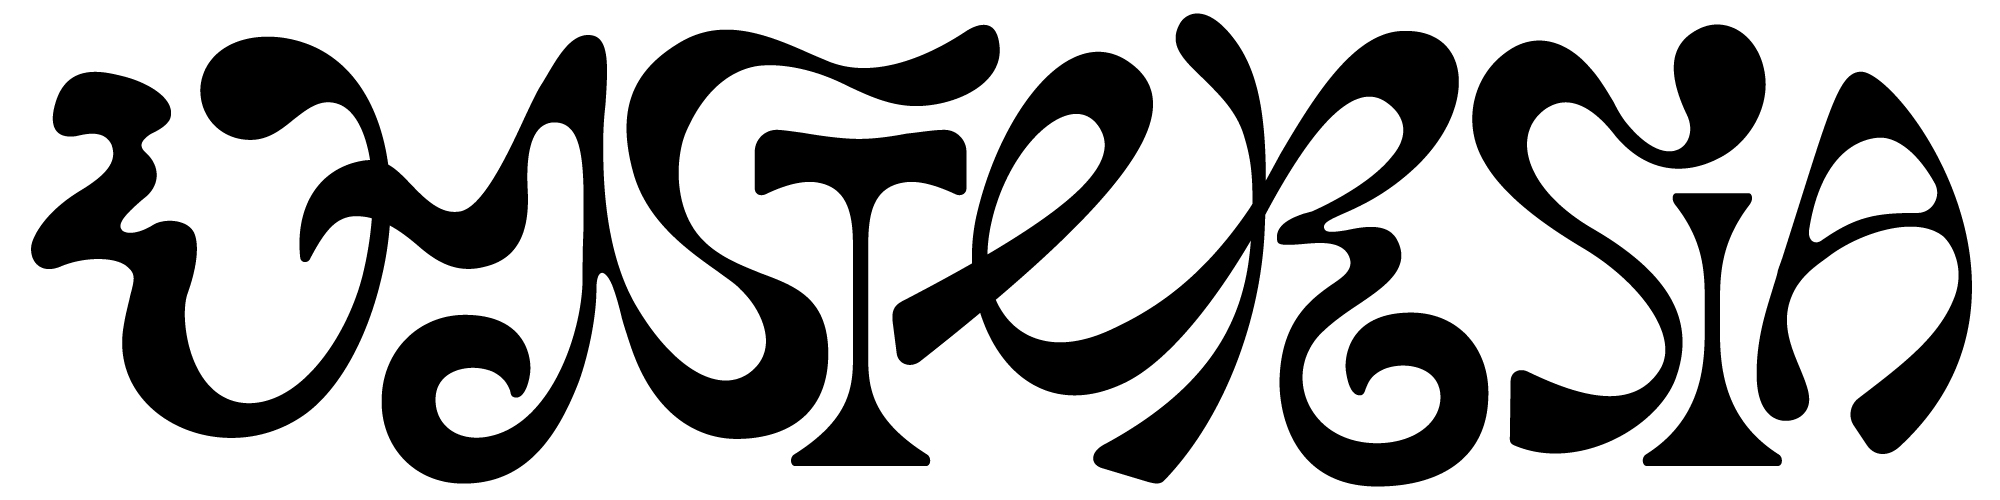 Oystersia_Lettering_large (1) 73